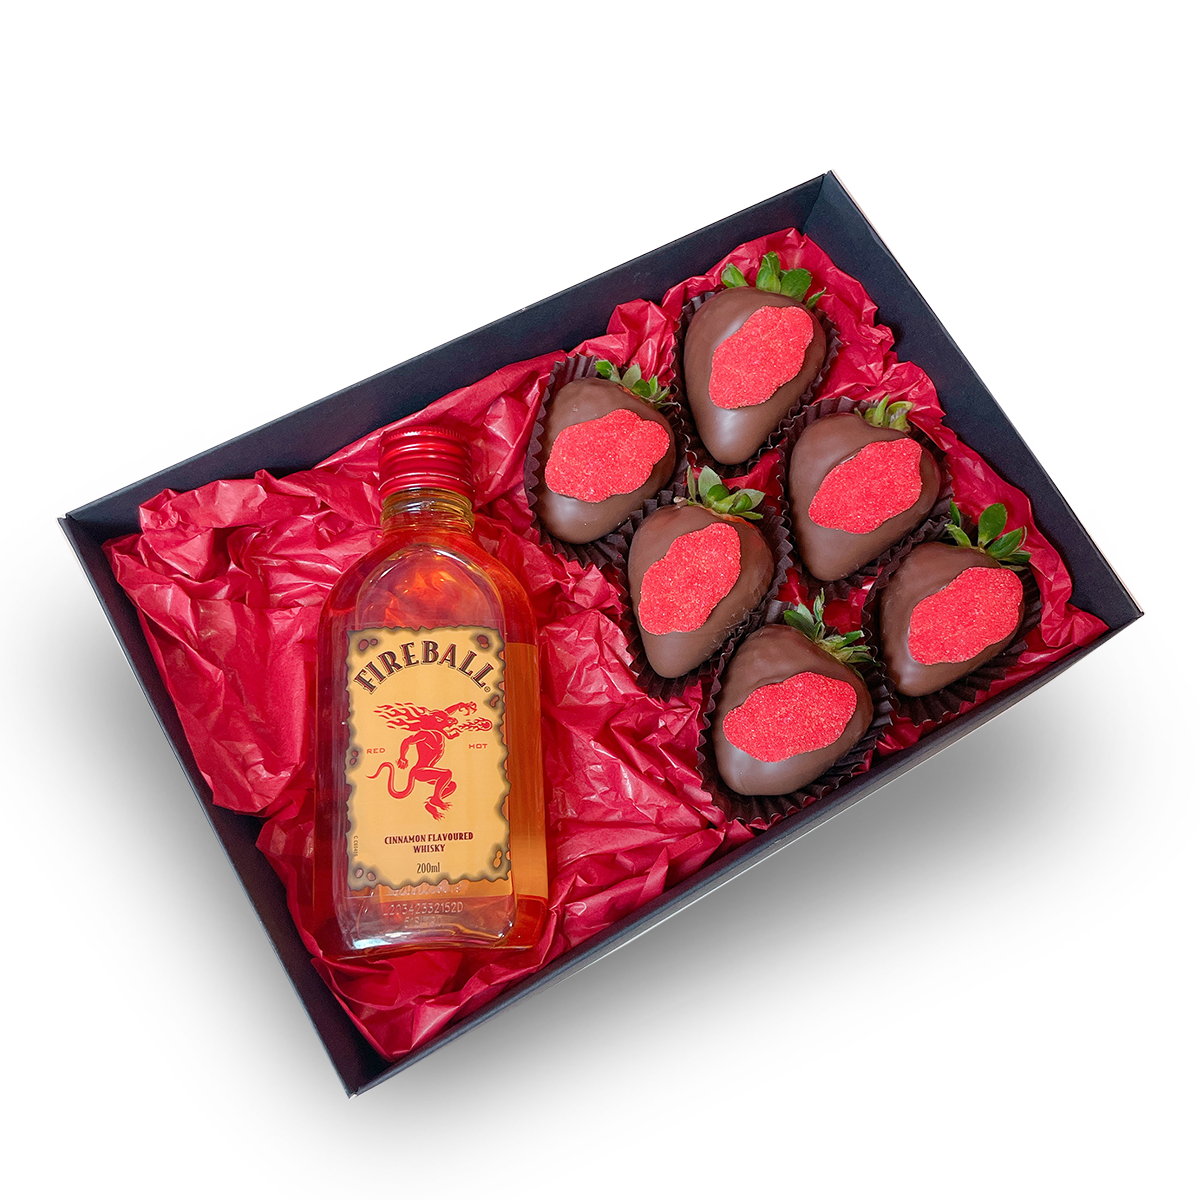 FireBall Whisky Gift Box, Sweet gift for him, Gift for a man same-day delivery Adelaide wide, Dessert Box and Brandy, Chocolate covered Strawberry box delivery, Chocolate Strawberries FireBall Whisky Box